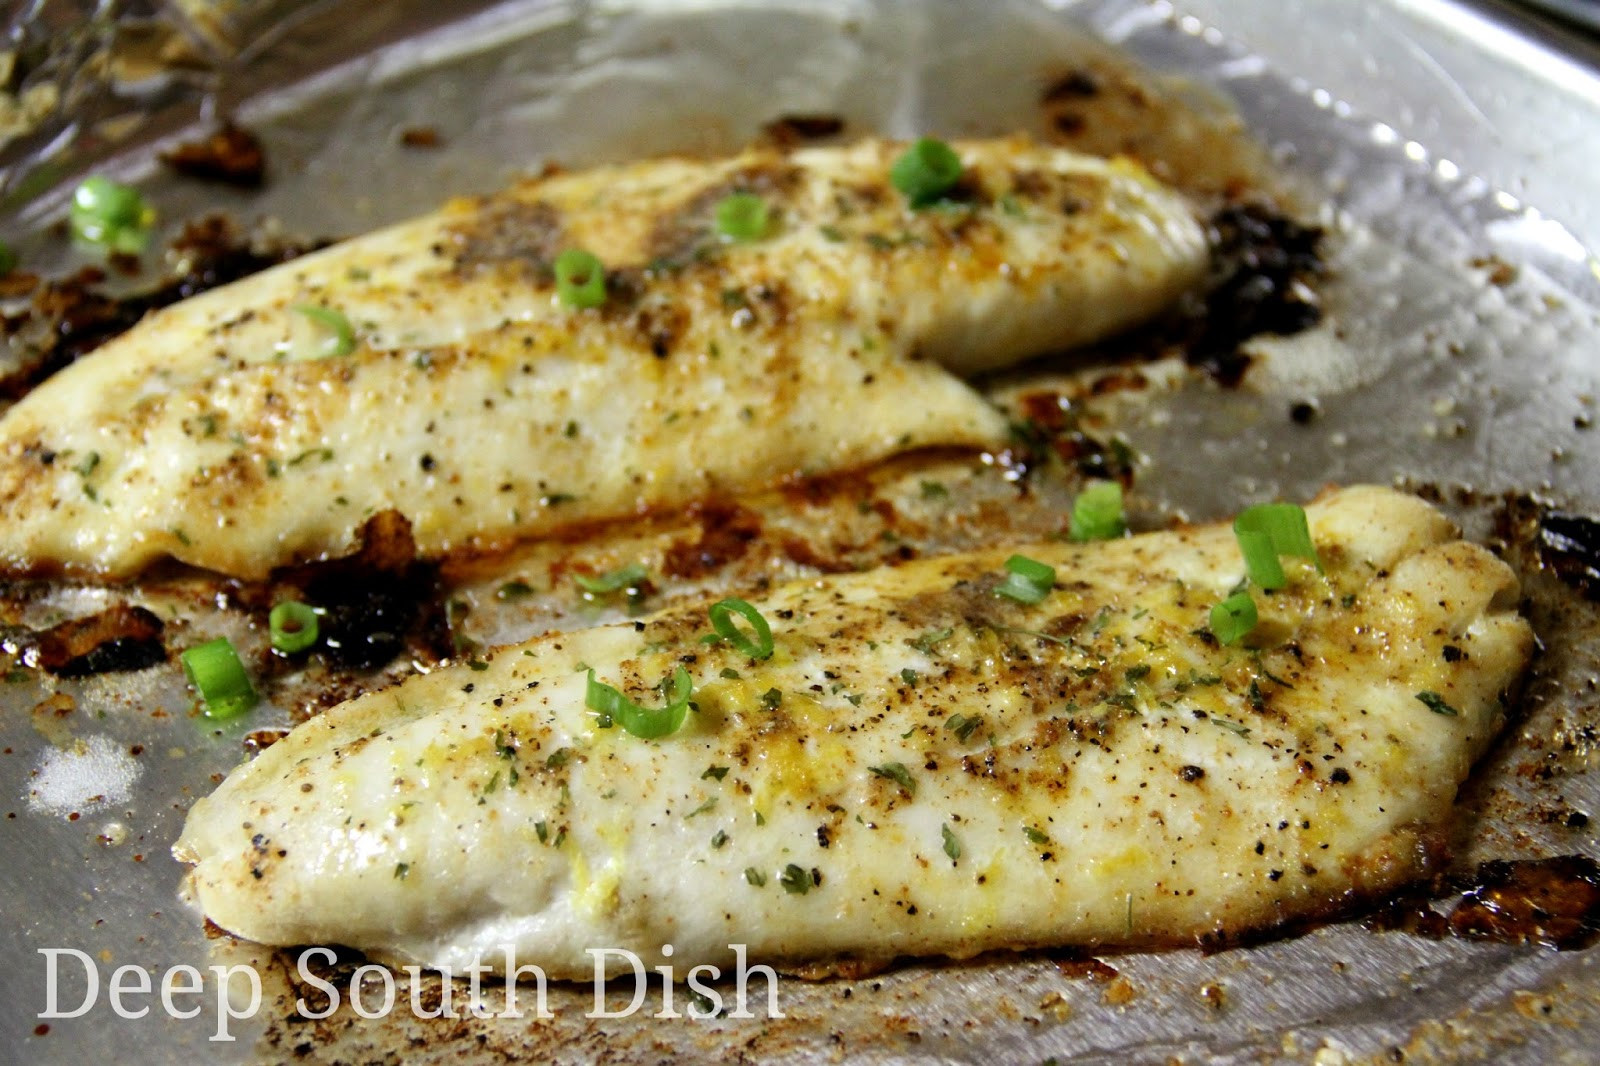 Recipes For Baked Fish Fillets
 Deep South Dish Baked Fish